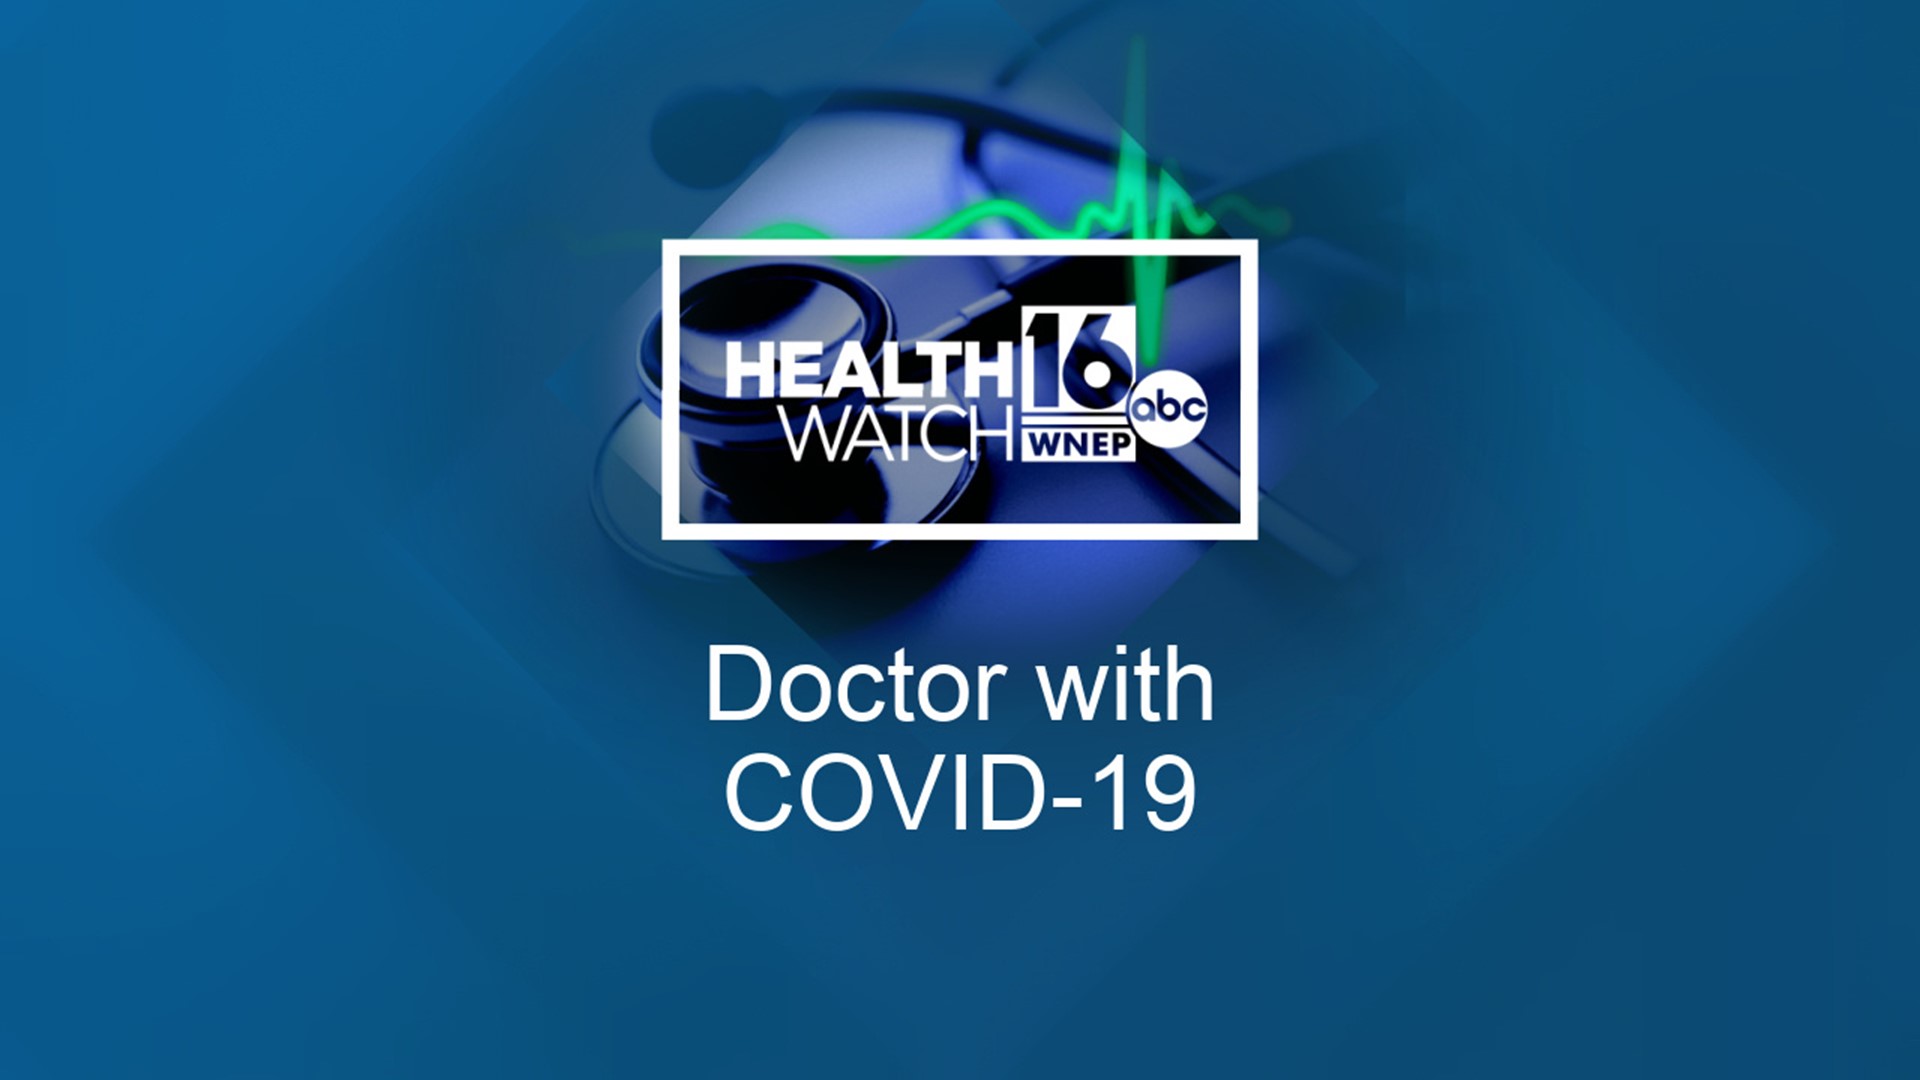 A Geisinger doctor who contracted the coronavirus shares what went on in her household.